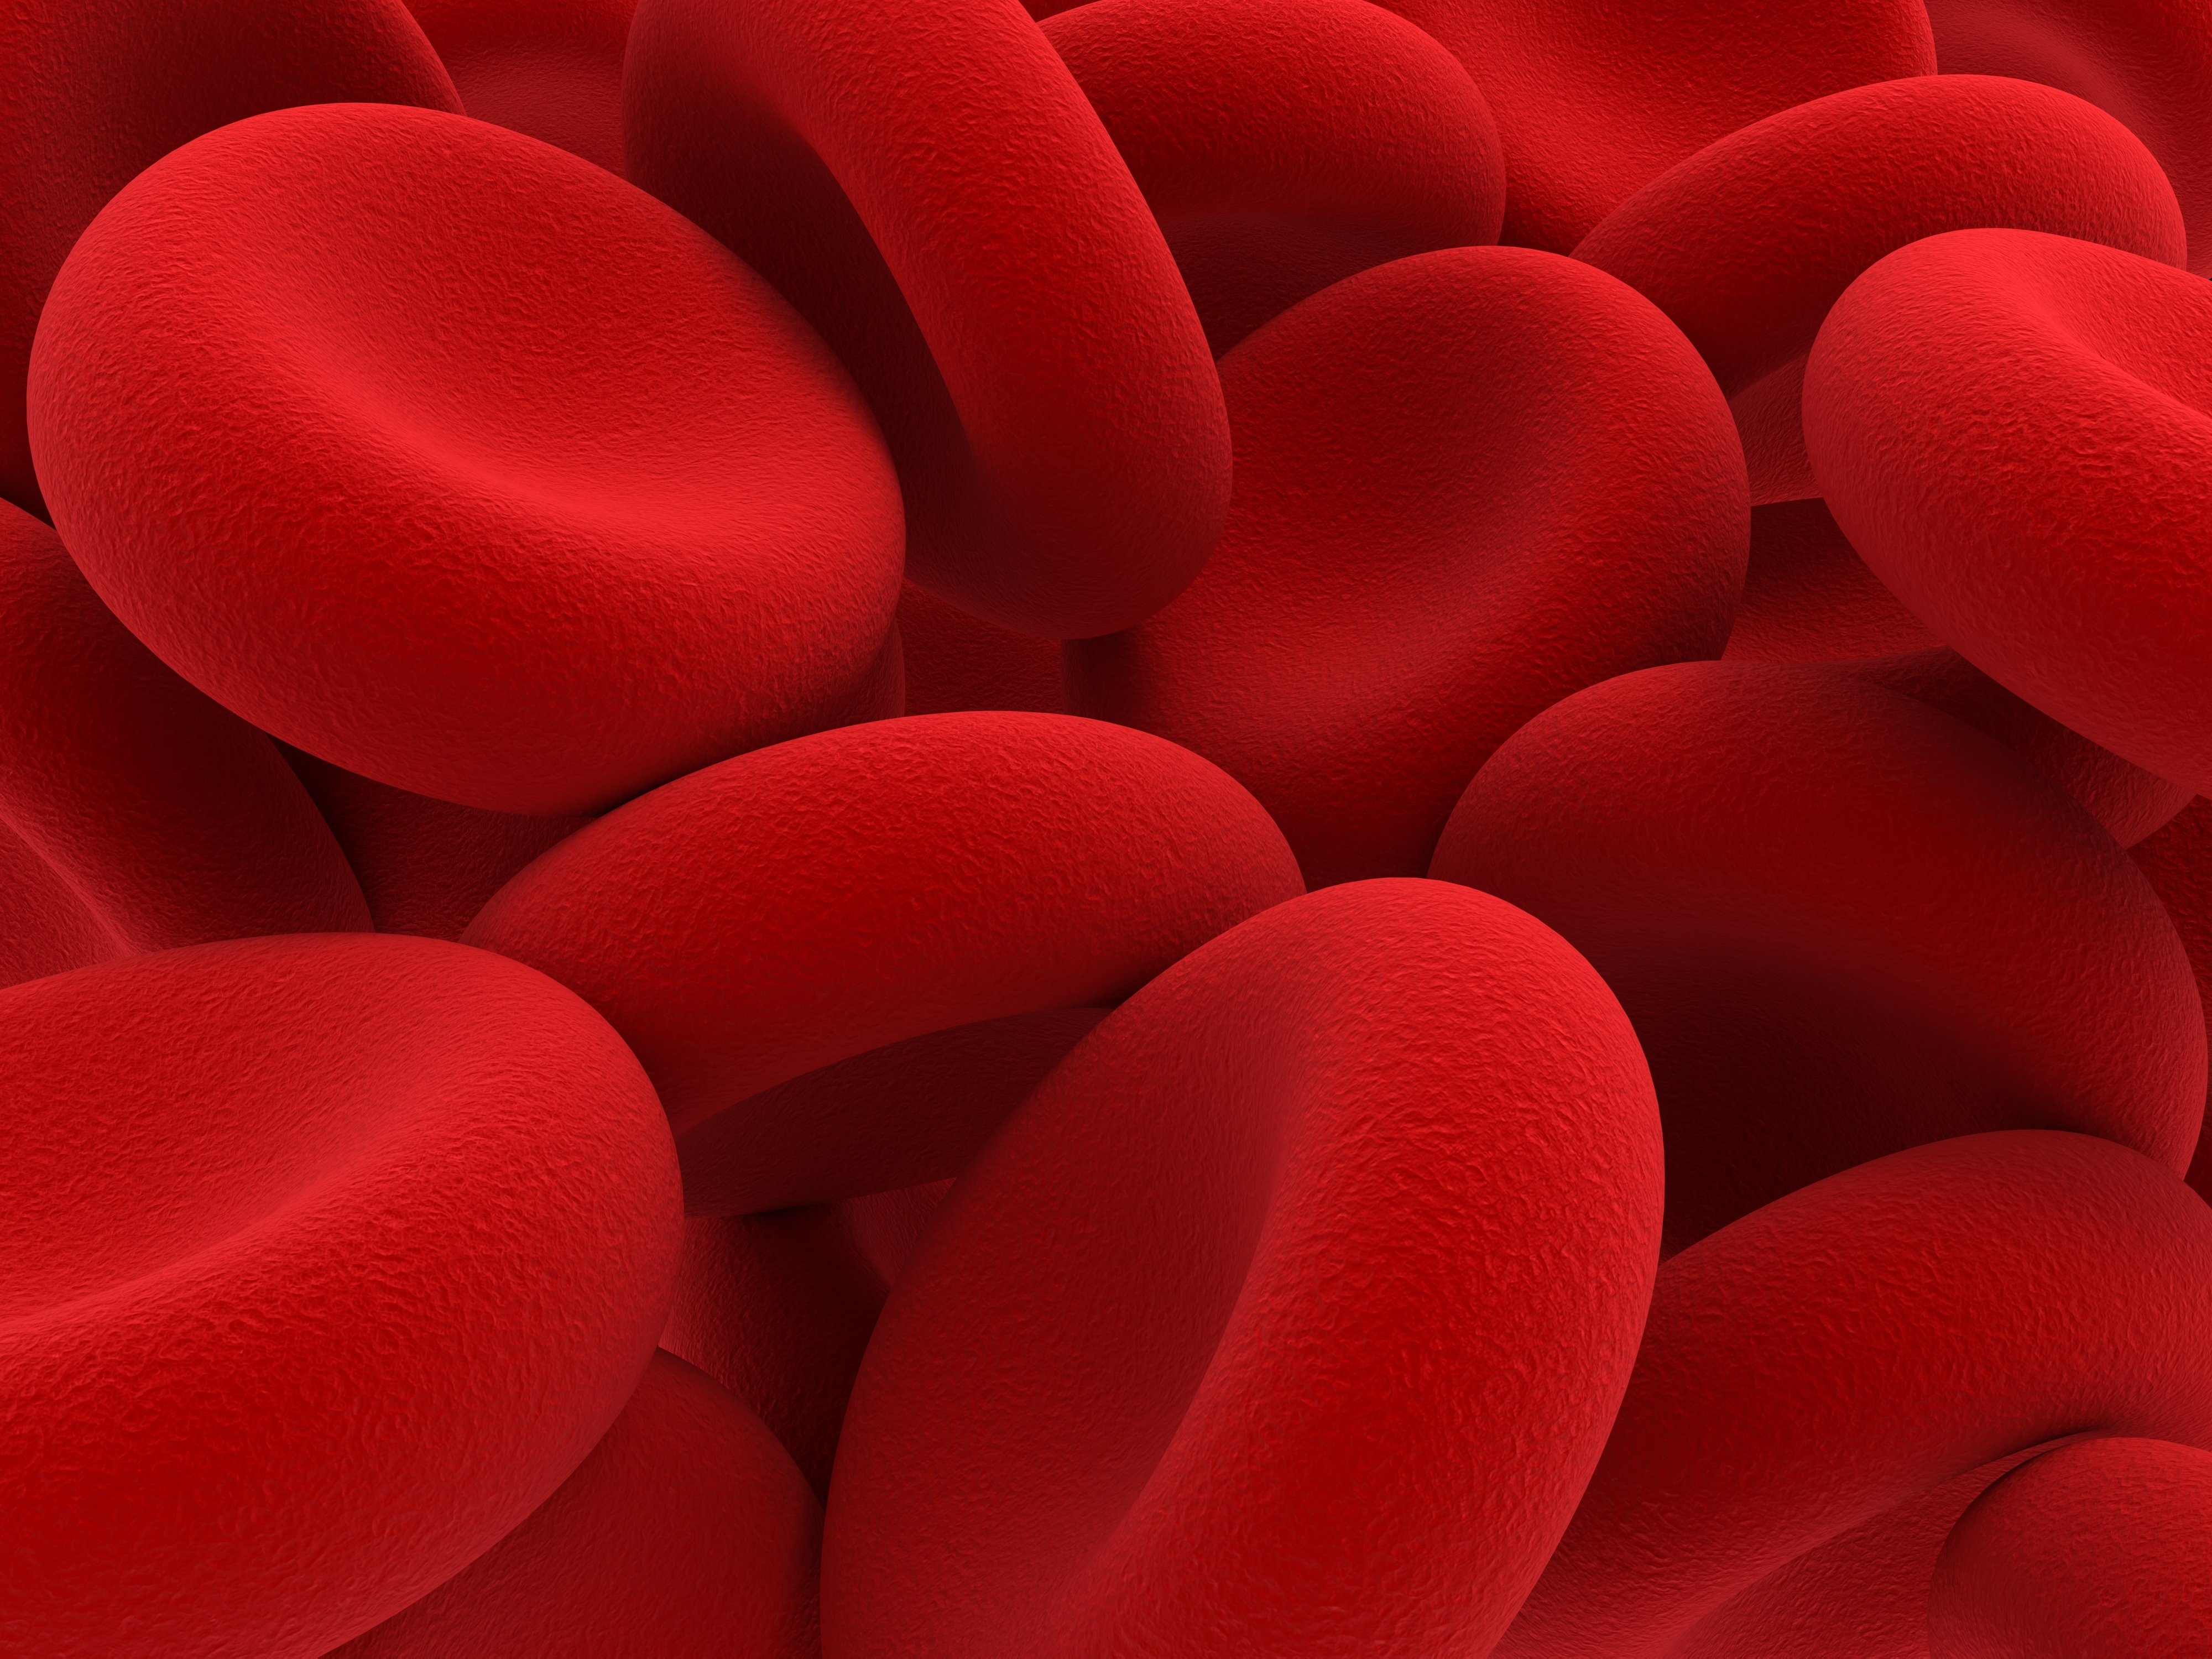 Cargo-carrying Red Blood Cells Alleviate Autoimmune Diseases in Mice